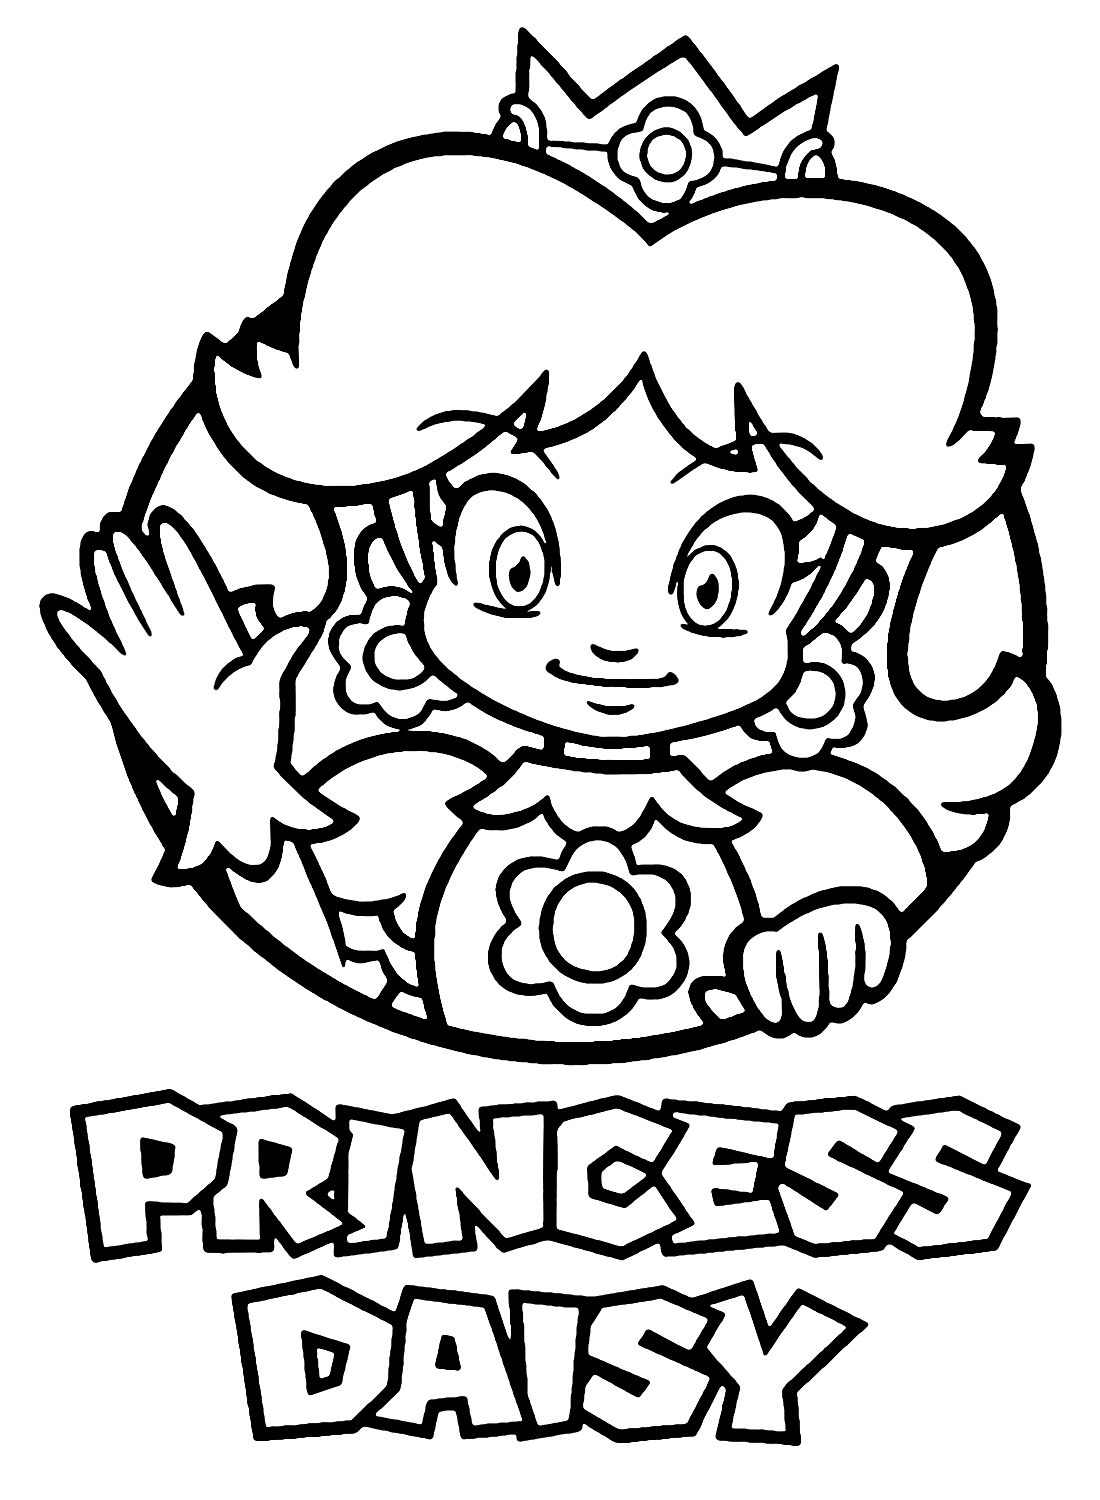 Princess Daisy Coloring Pages - Free Printable Coloring Pages